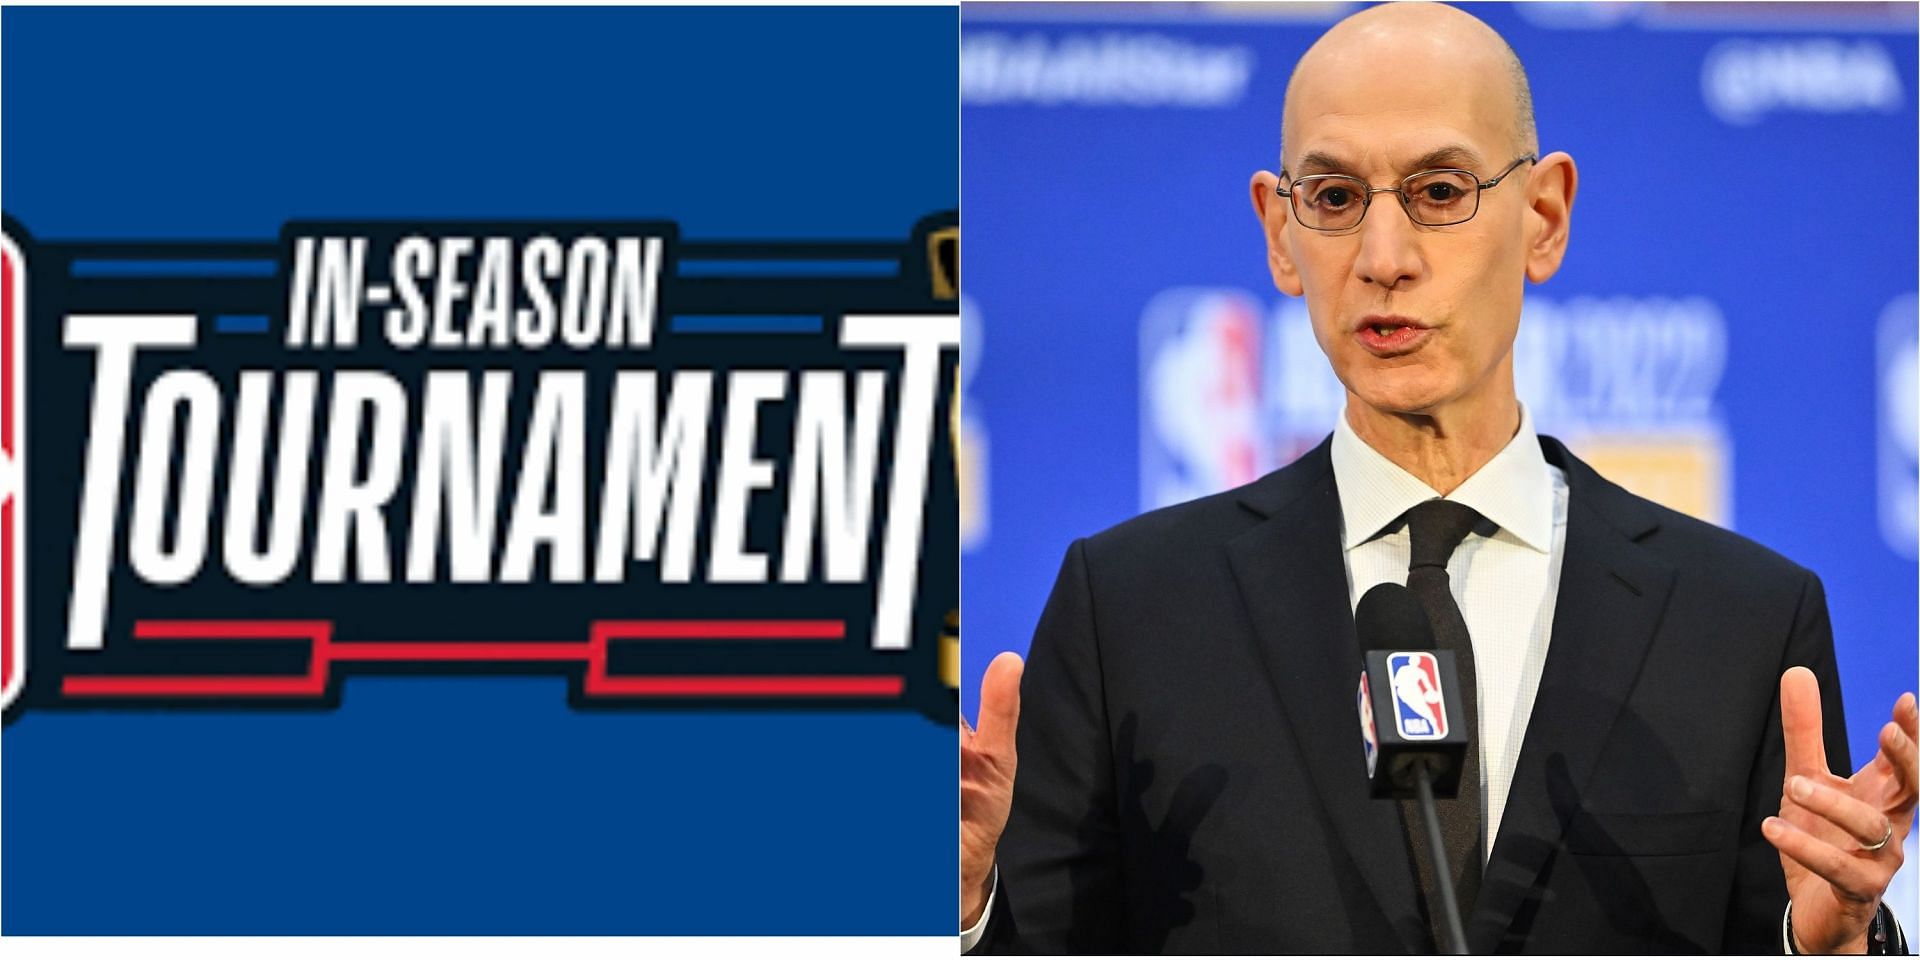 The NBA In-Season Tournament Would be Intriguing if it Actually Functioned  like the FA Cup or Champions League - Crossing Broad